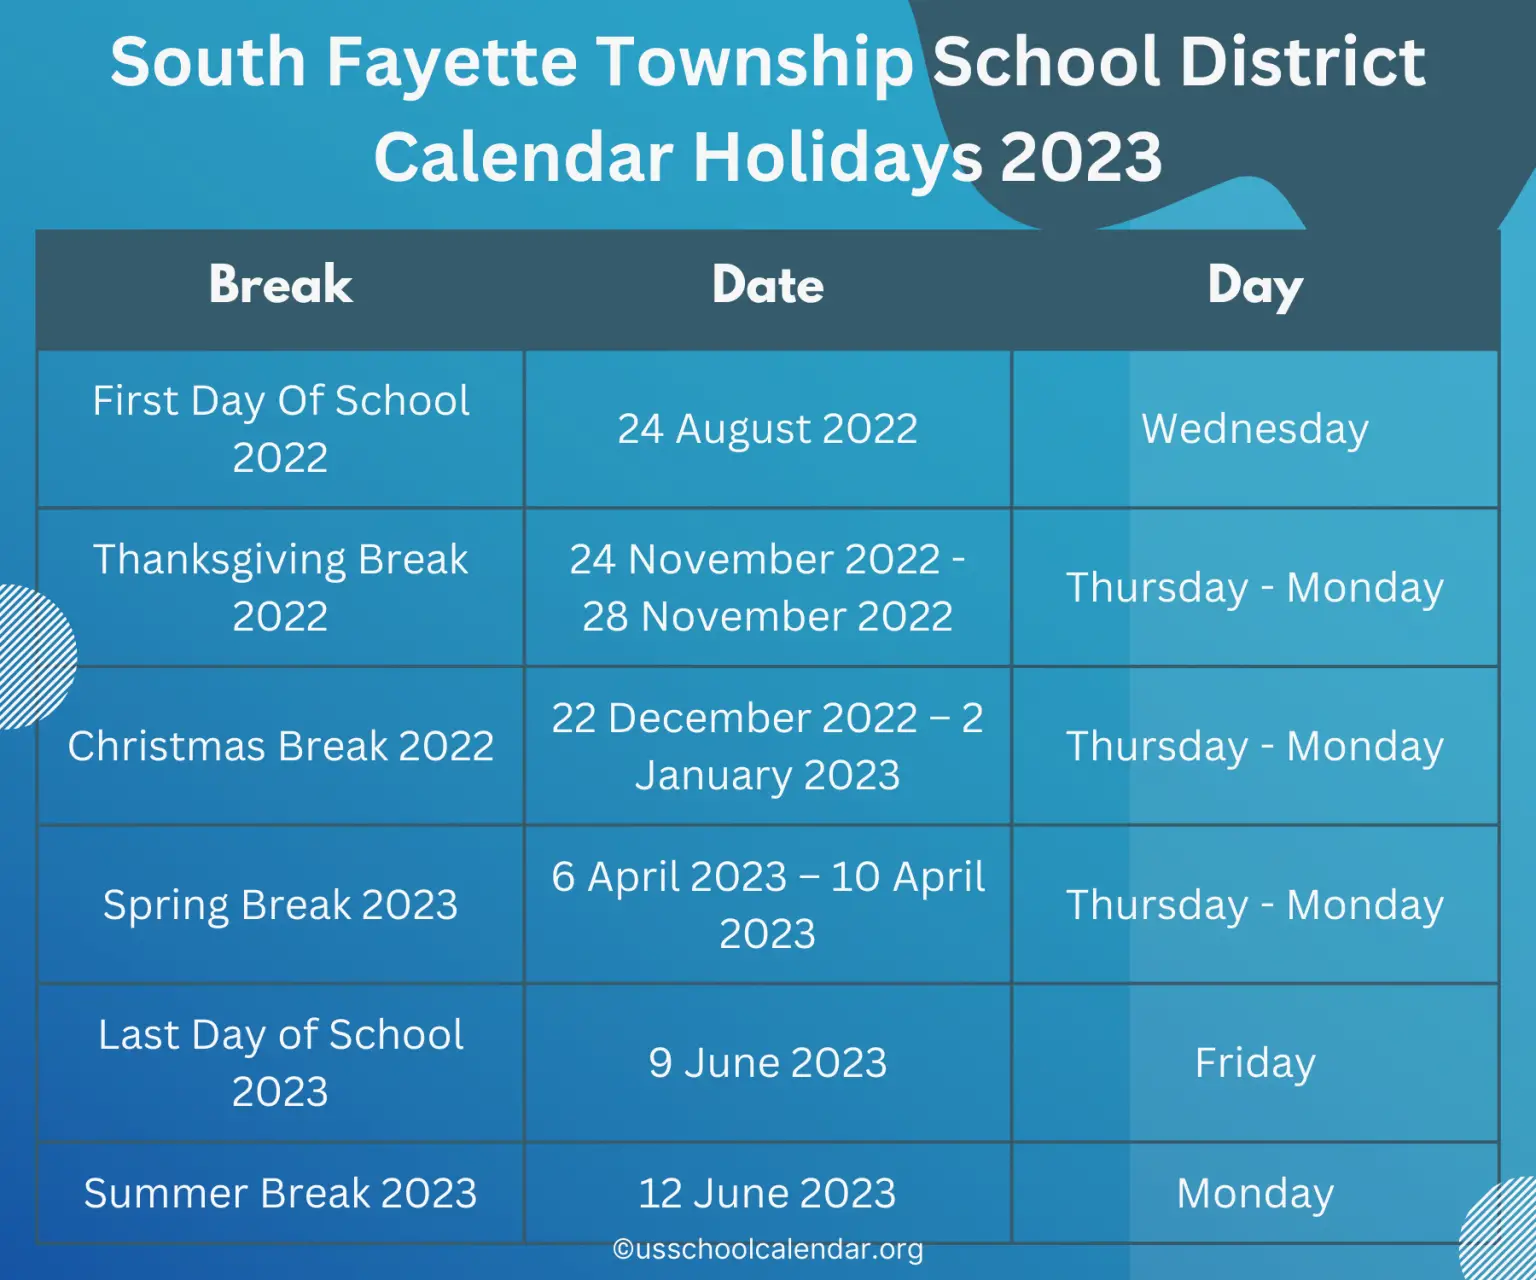 south-fayette-township-school-district-calendar-holidays-2023